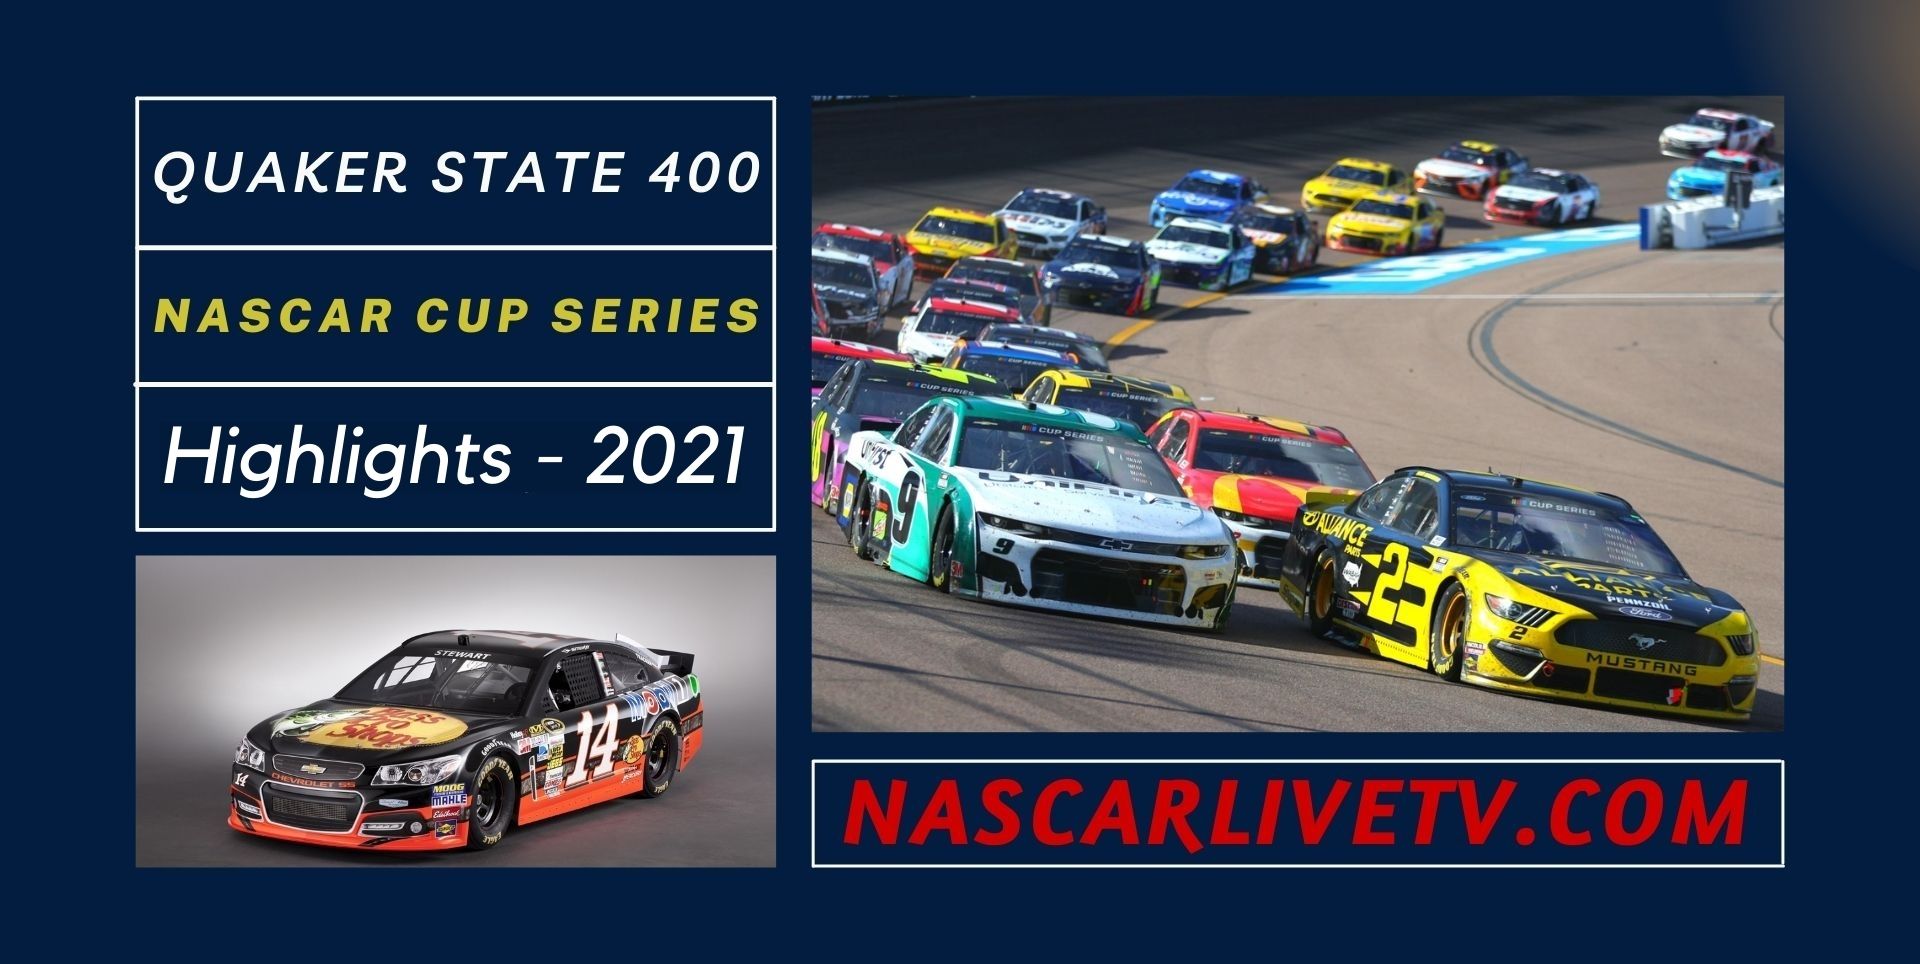 Quaker State 400 NASCAR Cup Series Highlights 2021